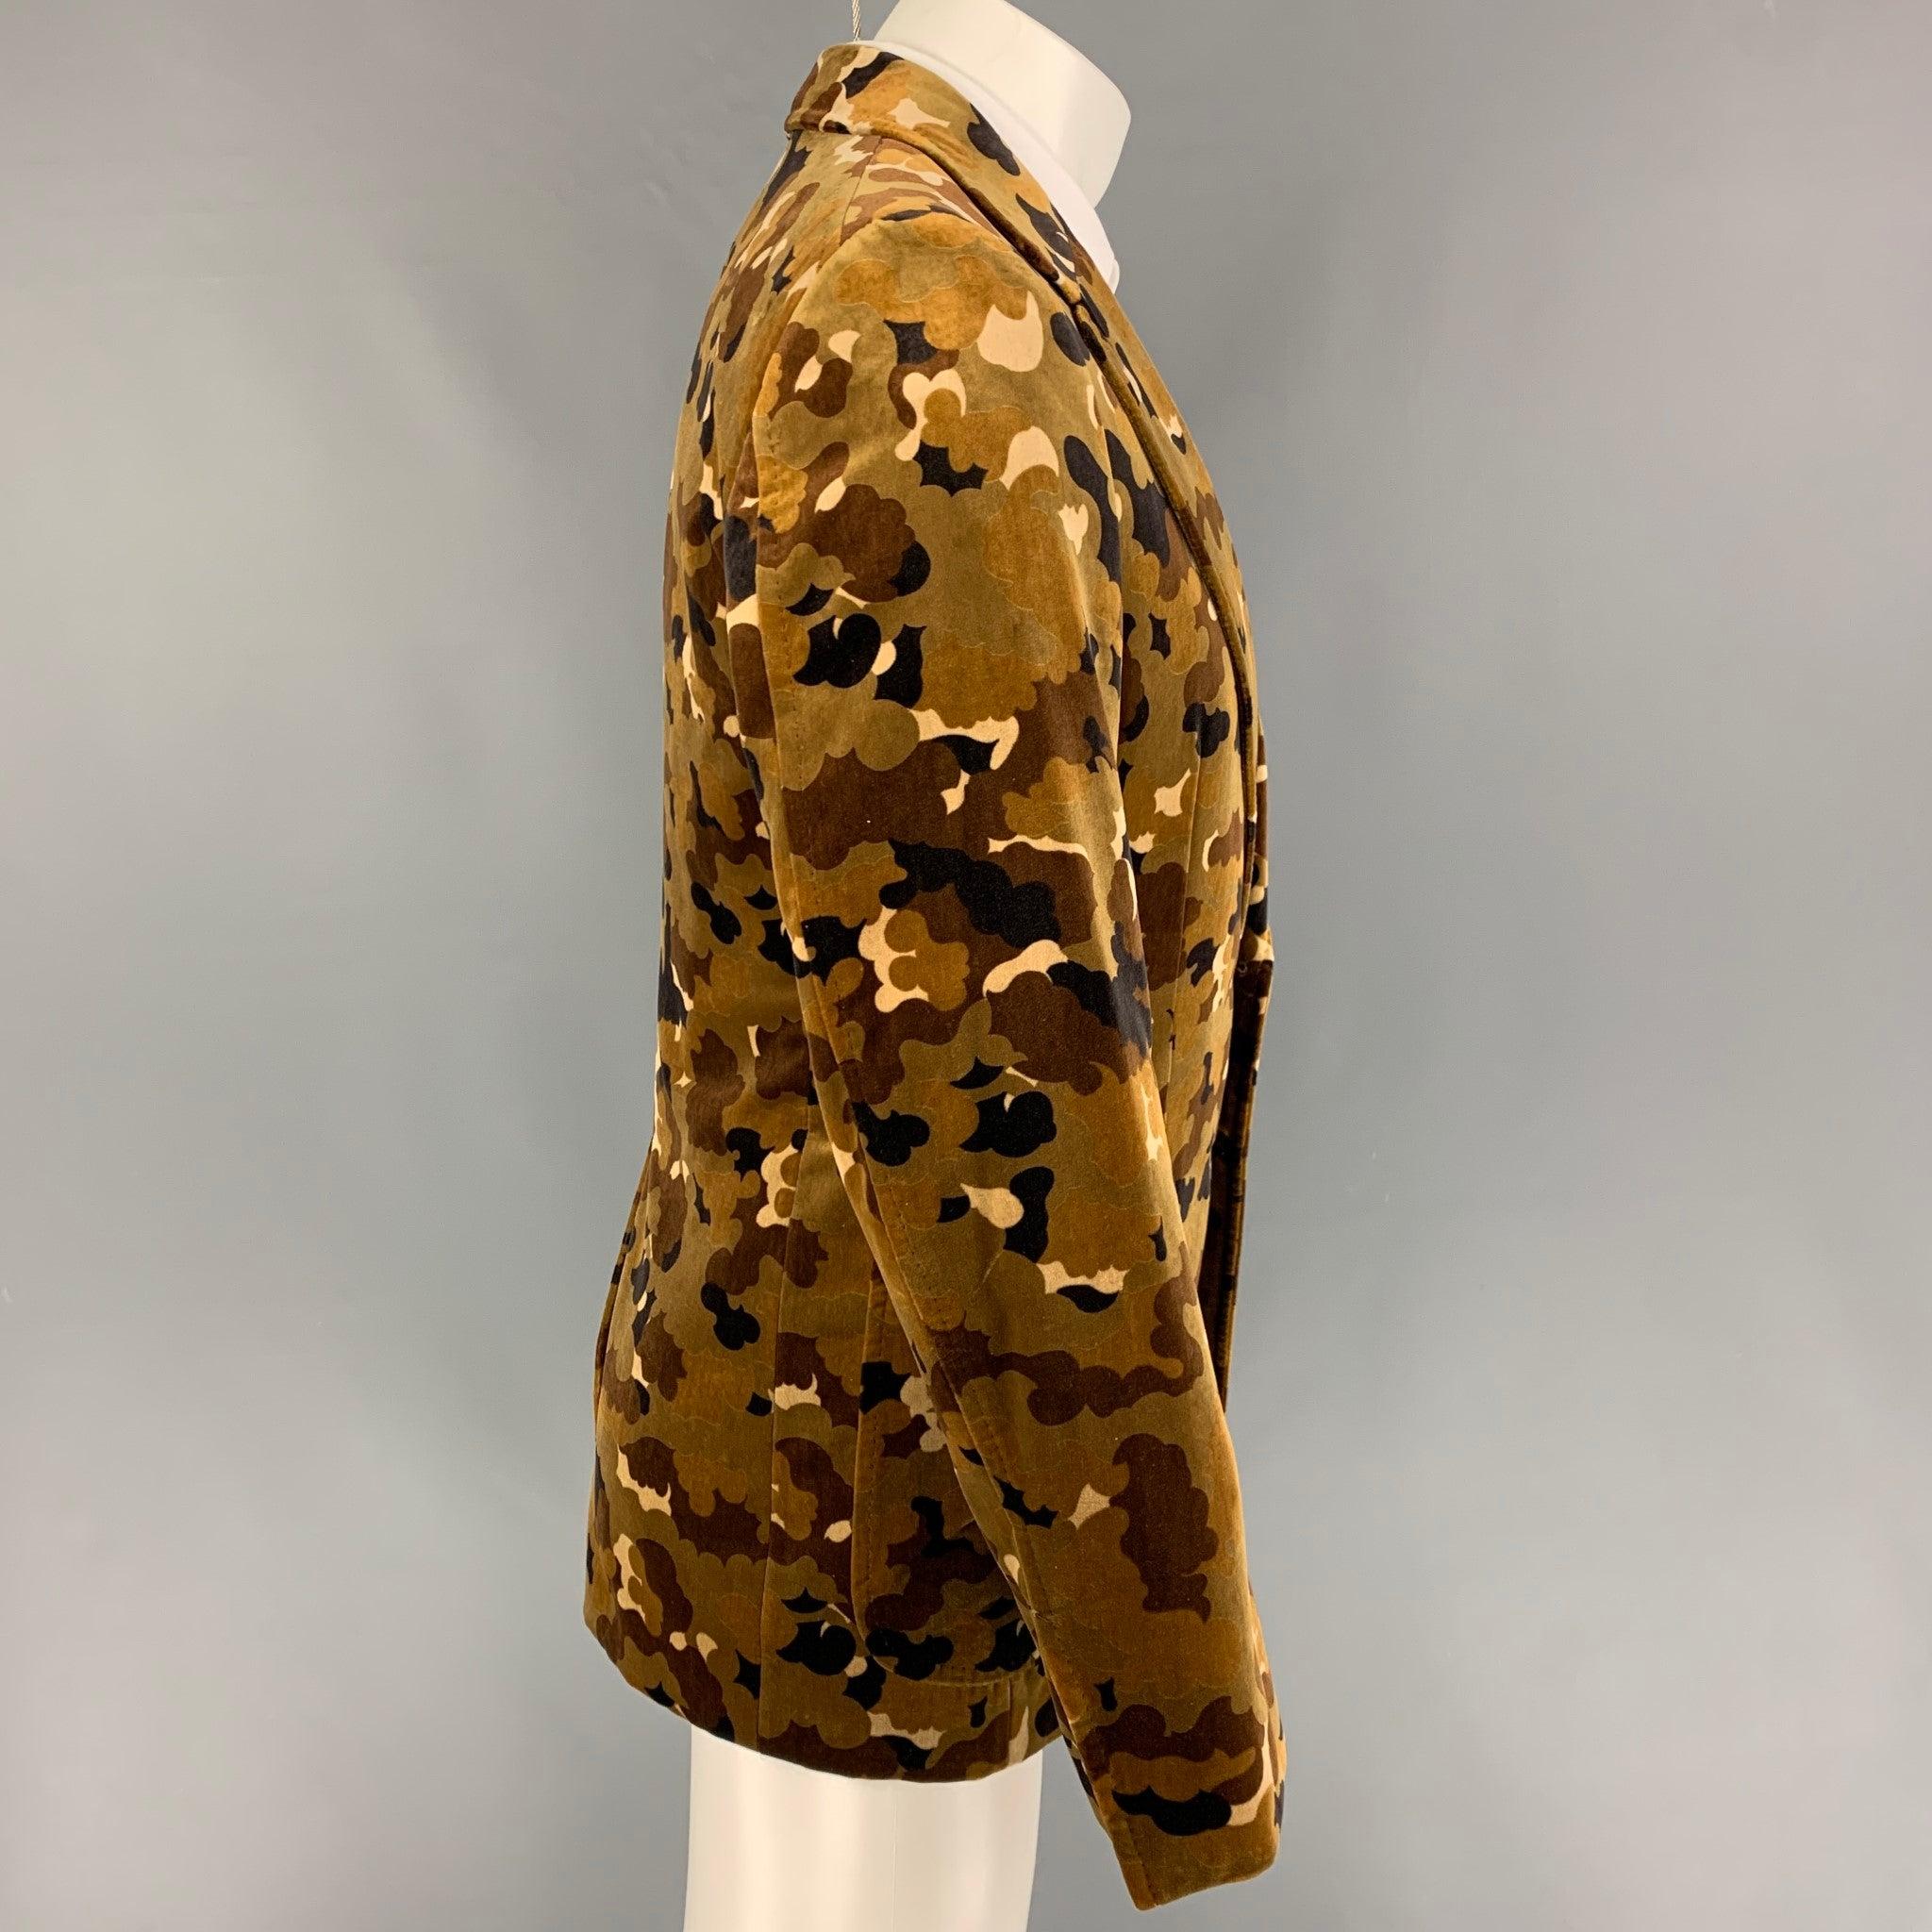 TOM FORD sport coat comes in a brown & tan camouflage cotton velvet with a full liner featuring a notch lapel, patch pockets, single back vent, and a double button closure. Made in Italy.
Excellent
Pre-Owned Condition. 

Marked:   48 R 